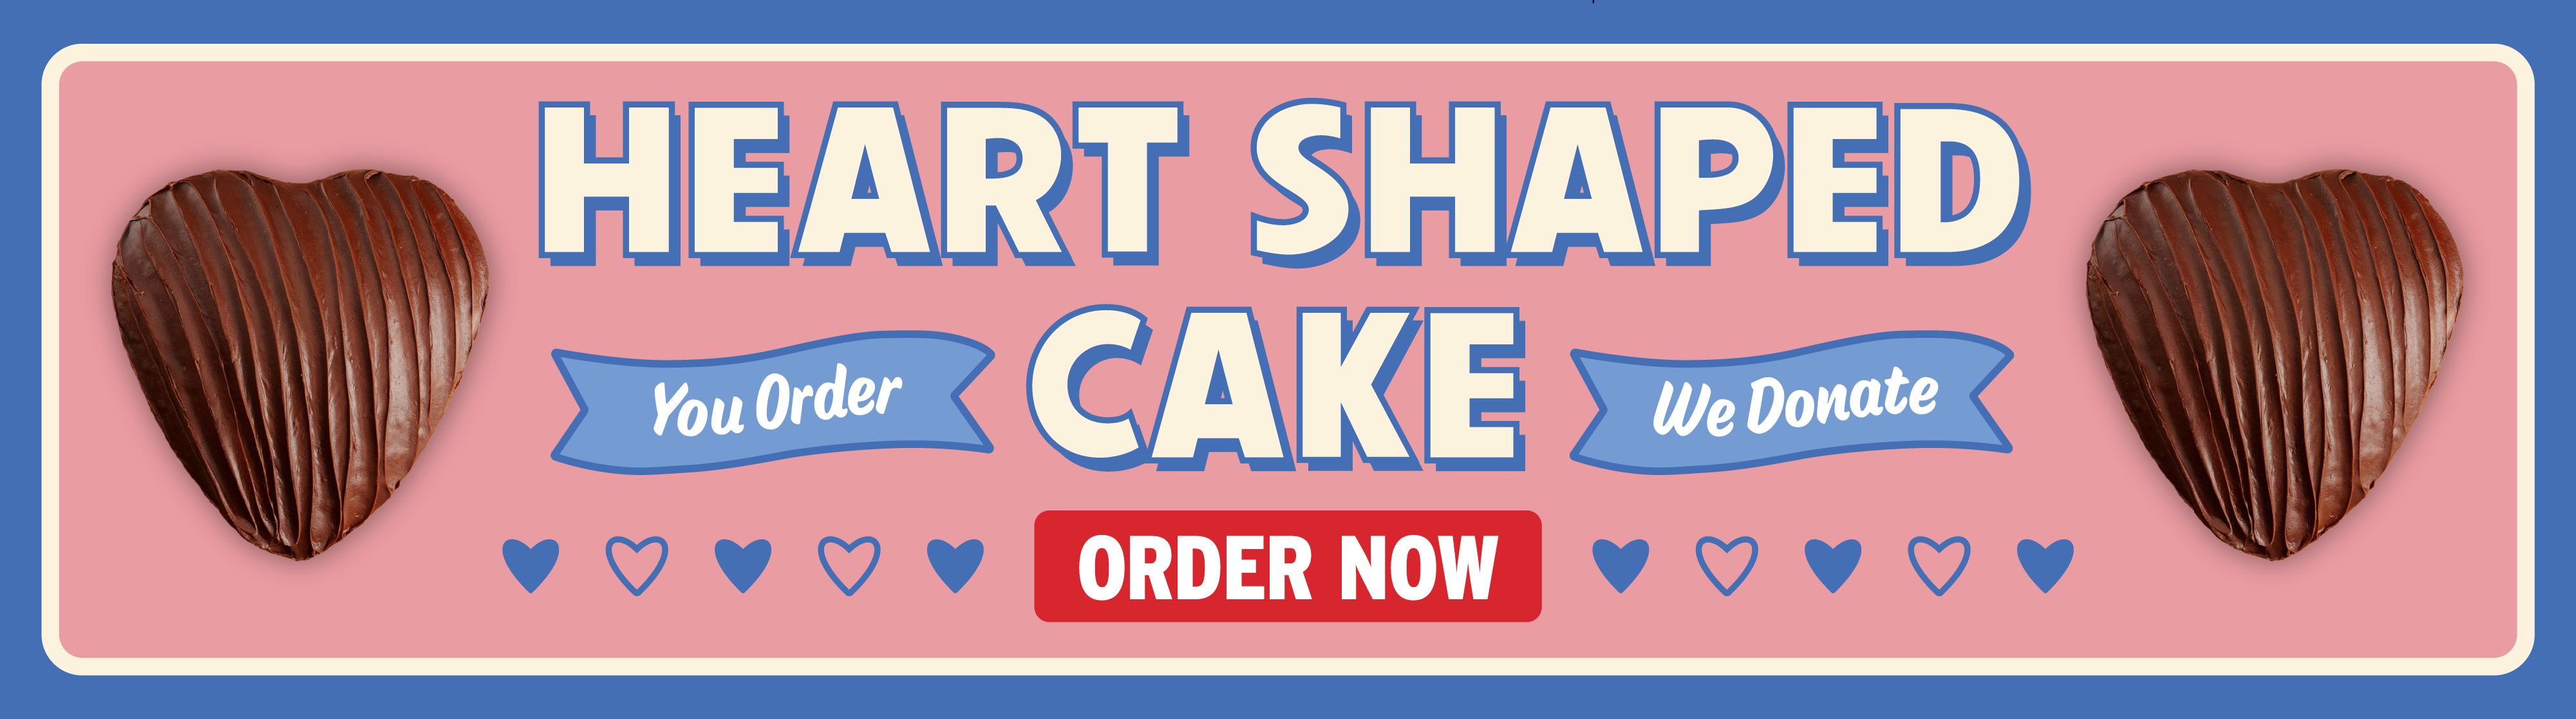 web_banner_mothers_day_heart_shaped_cakes